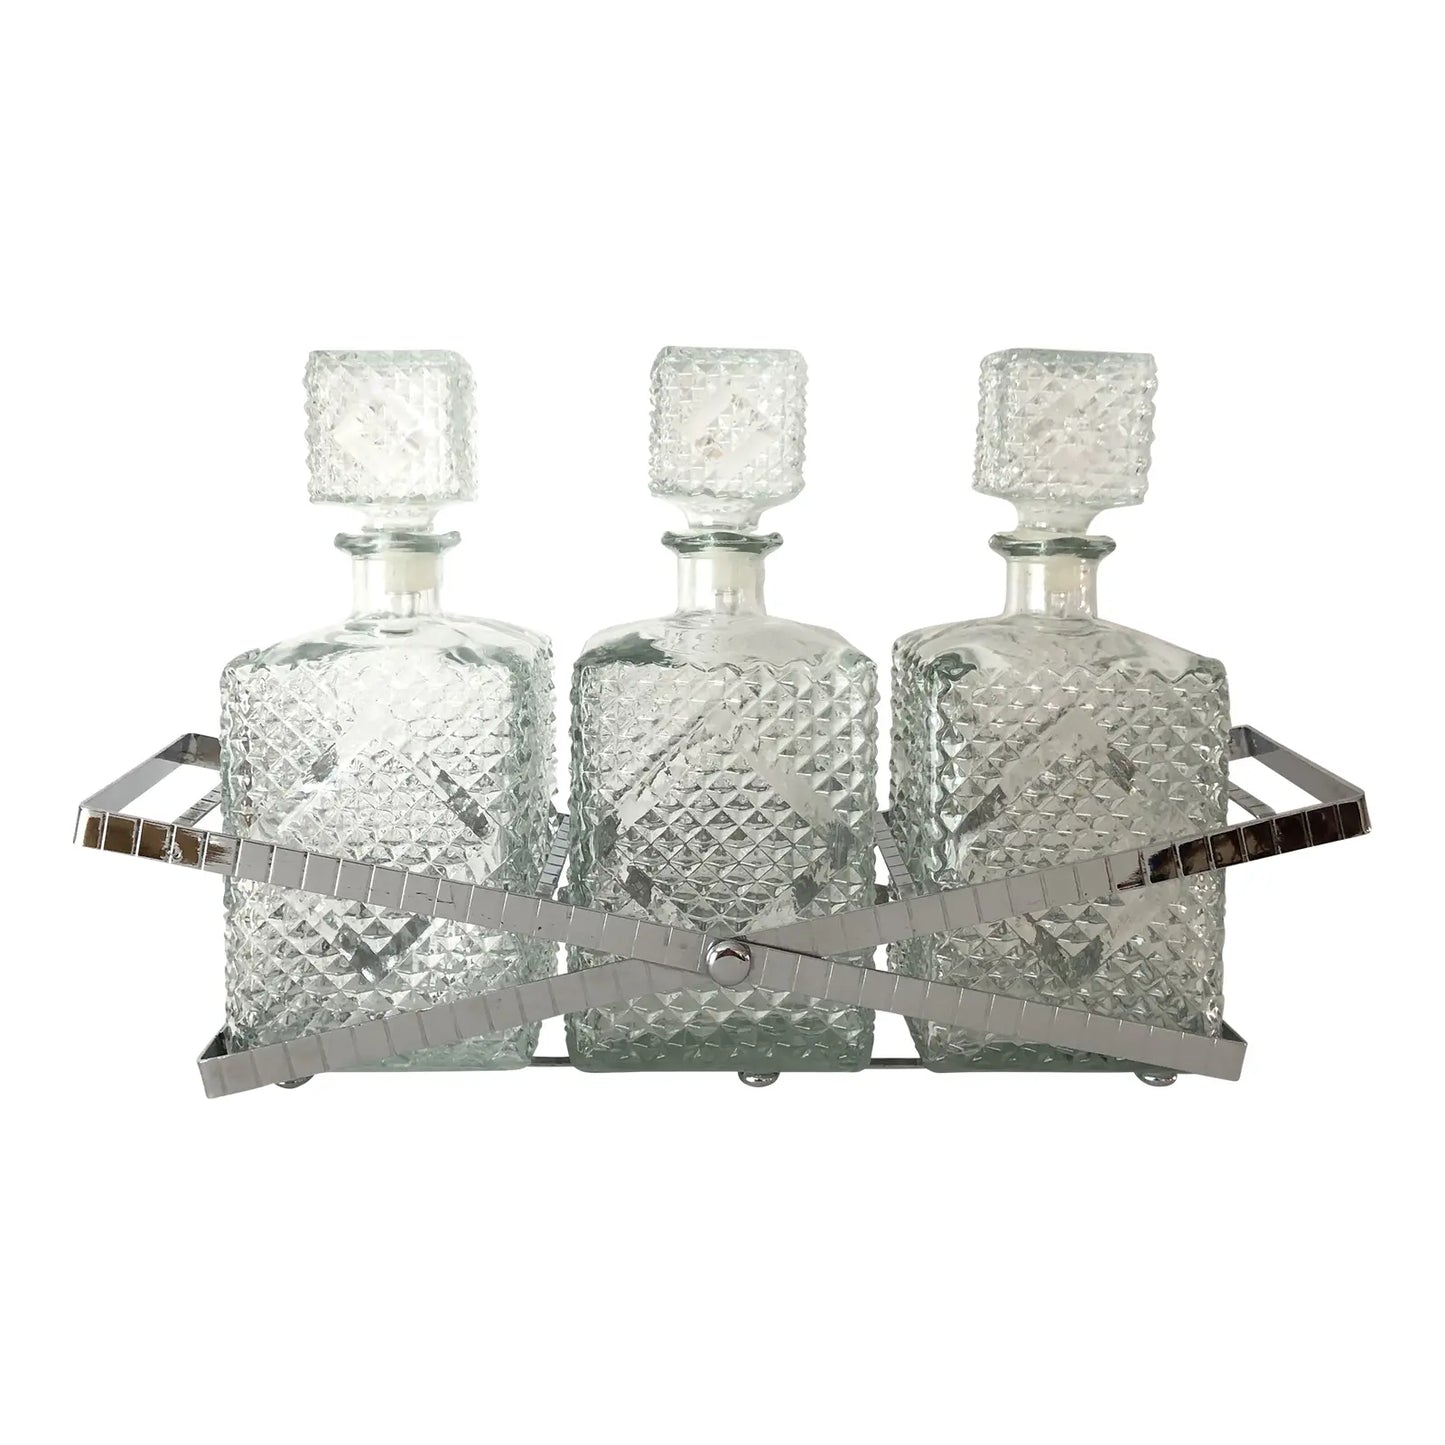 Vintage 1970s Barware Square Hollywood Regency Glass Decanter Trio in Chrome Plated Tray - Set of 3